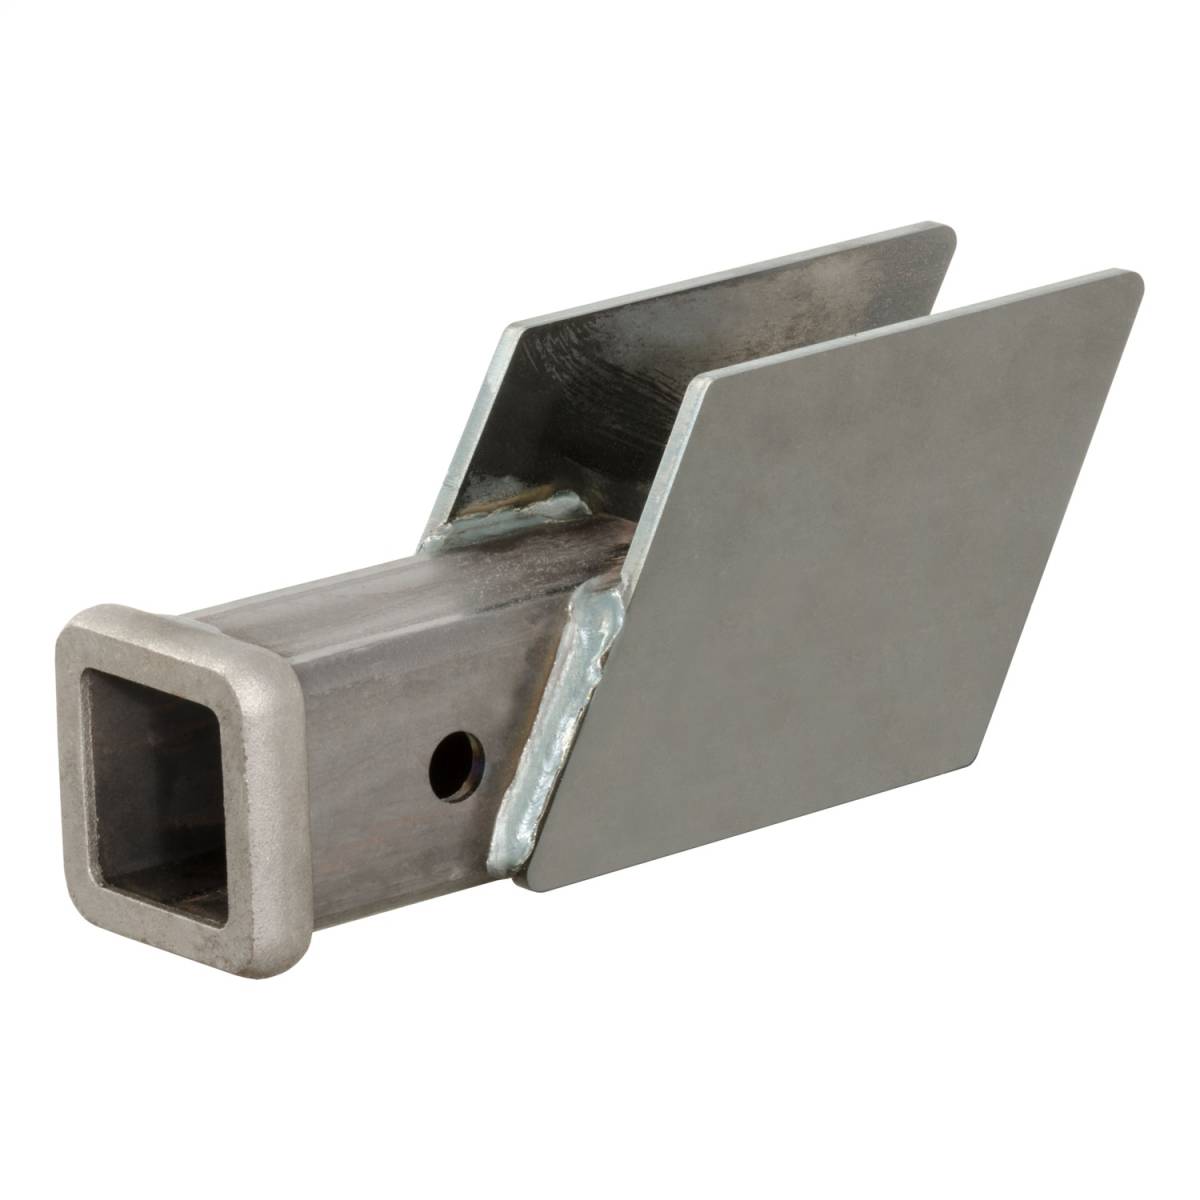 Weld-On Hitch Box, CURT, 49717 Nelson Truck Equipment and Accessories